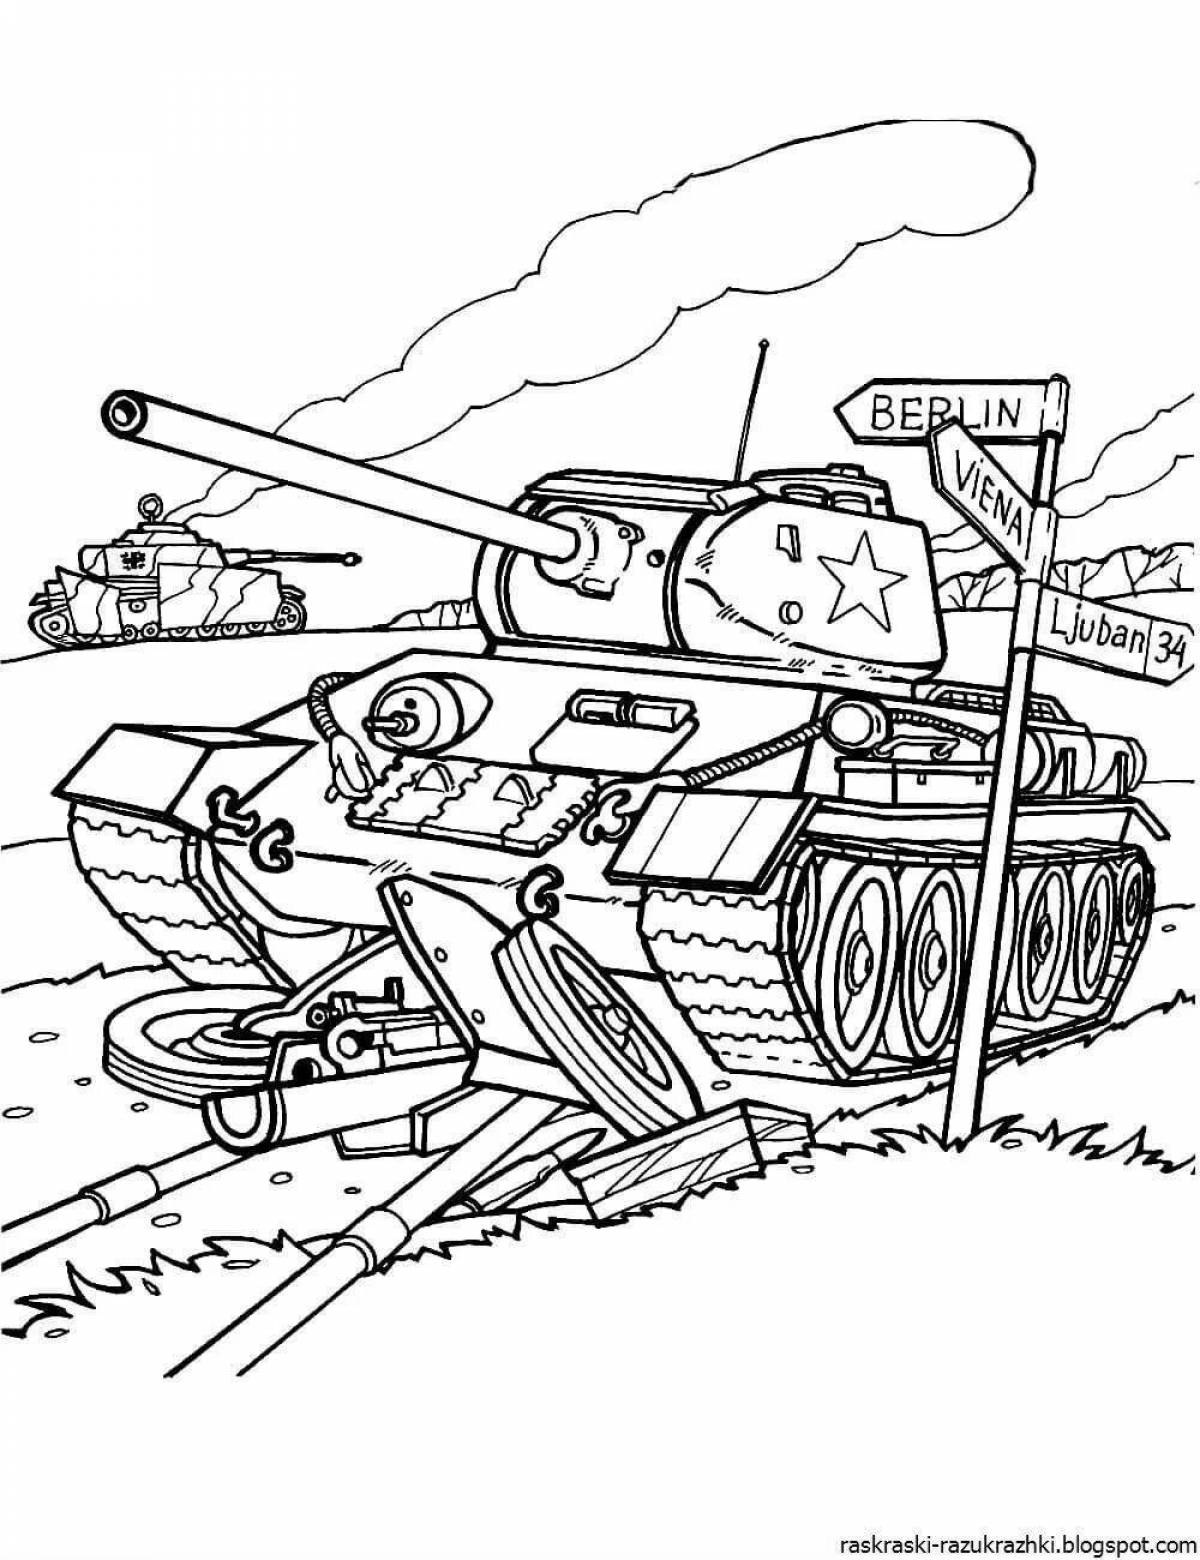 Creative military coloring book for kids 6-7 years old